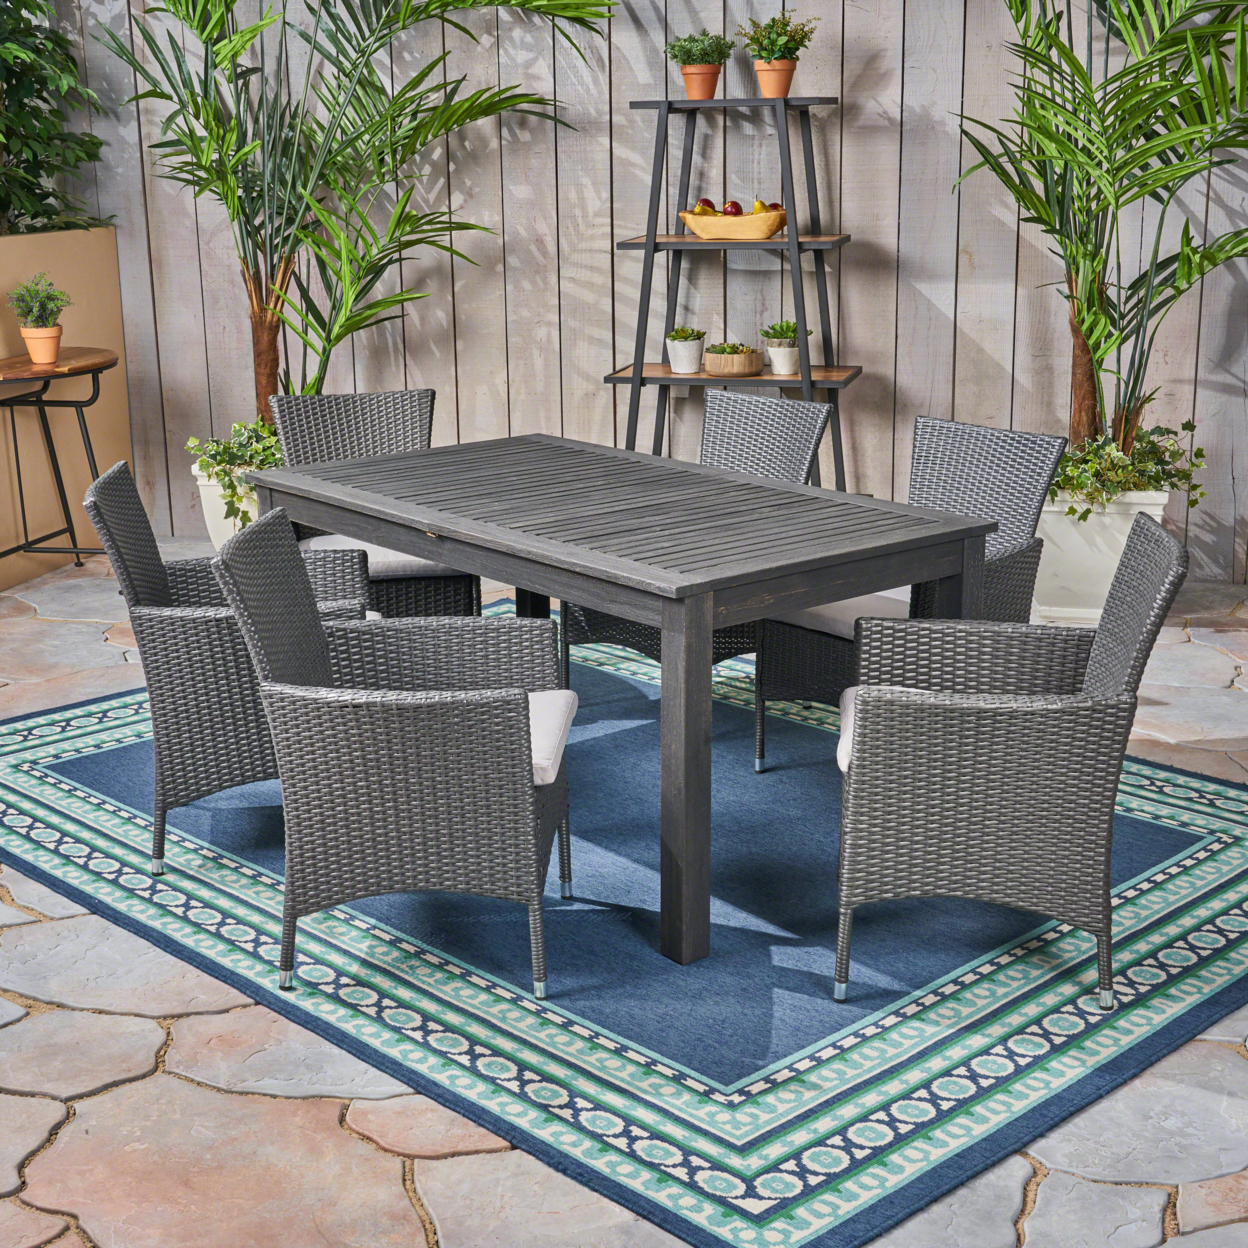 Austin Outdoor Wood And Wicker Expandable Dining Set - Natural Stained + Multi Brown + Beige, 7-Piece Set